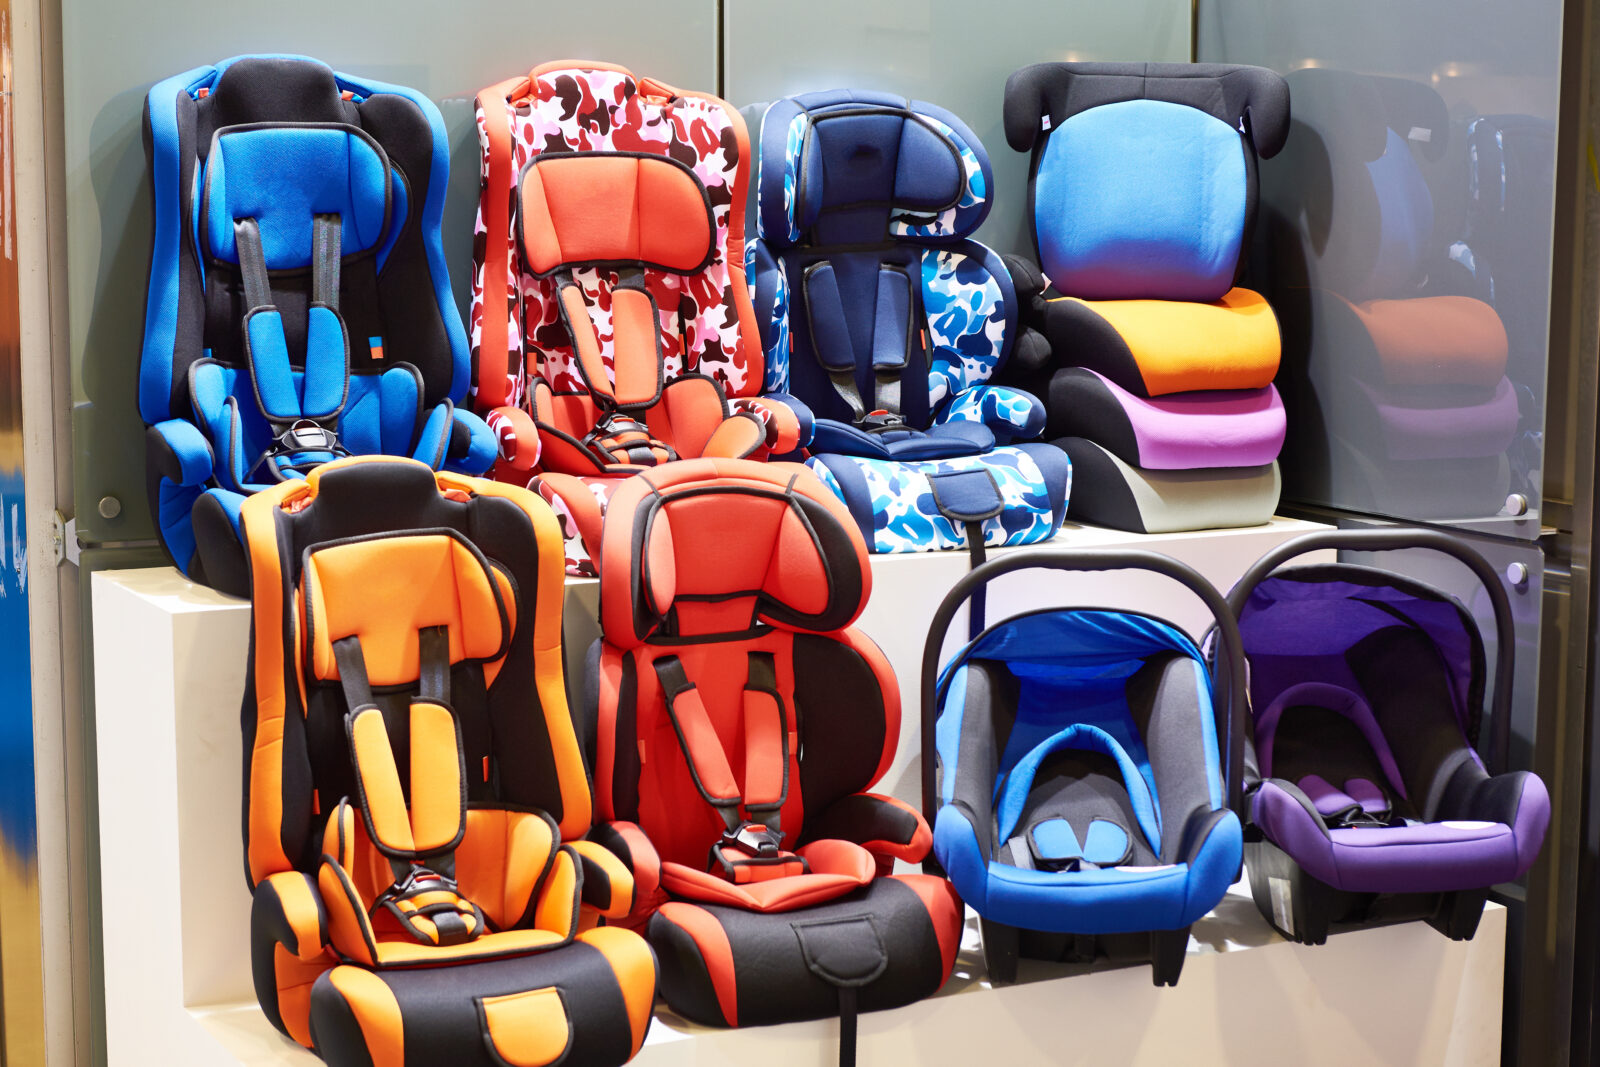 Series of carseats from rear facing to booster seats, line up in rows at a store